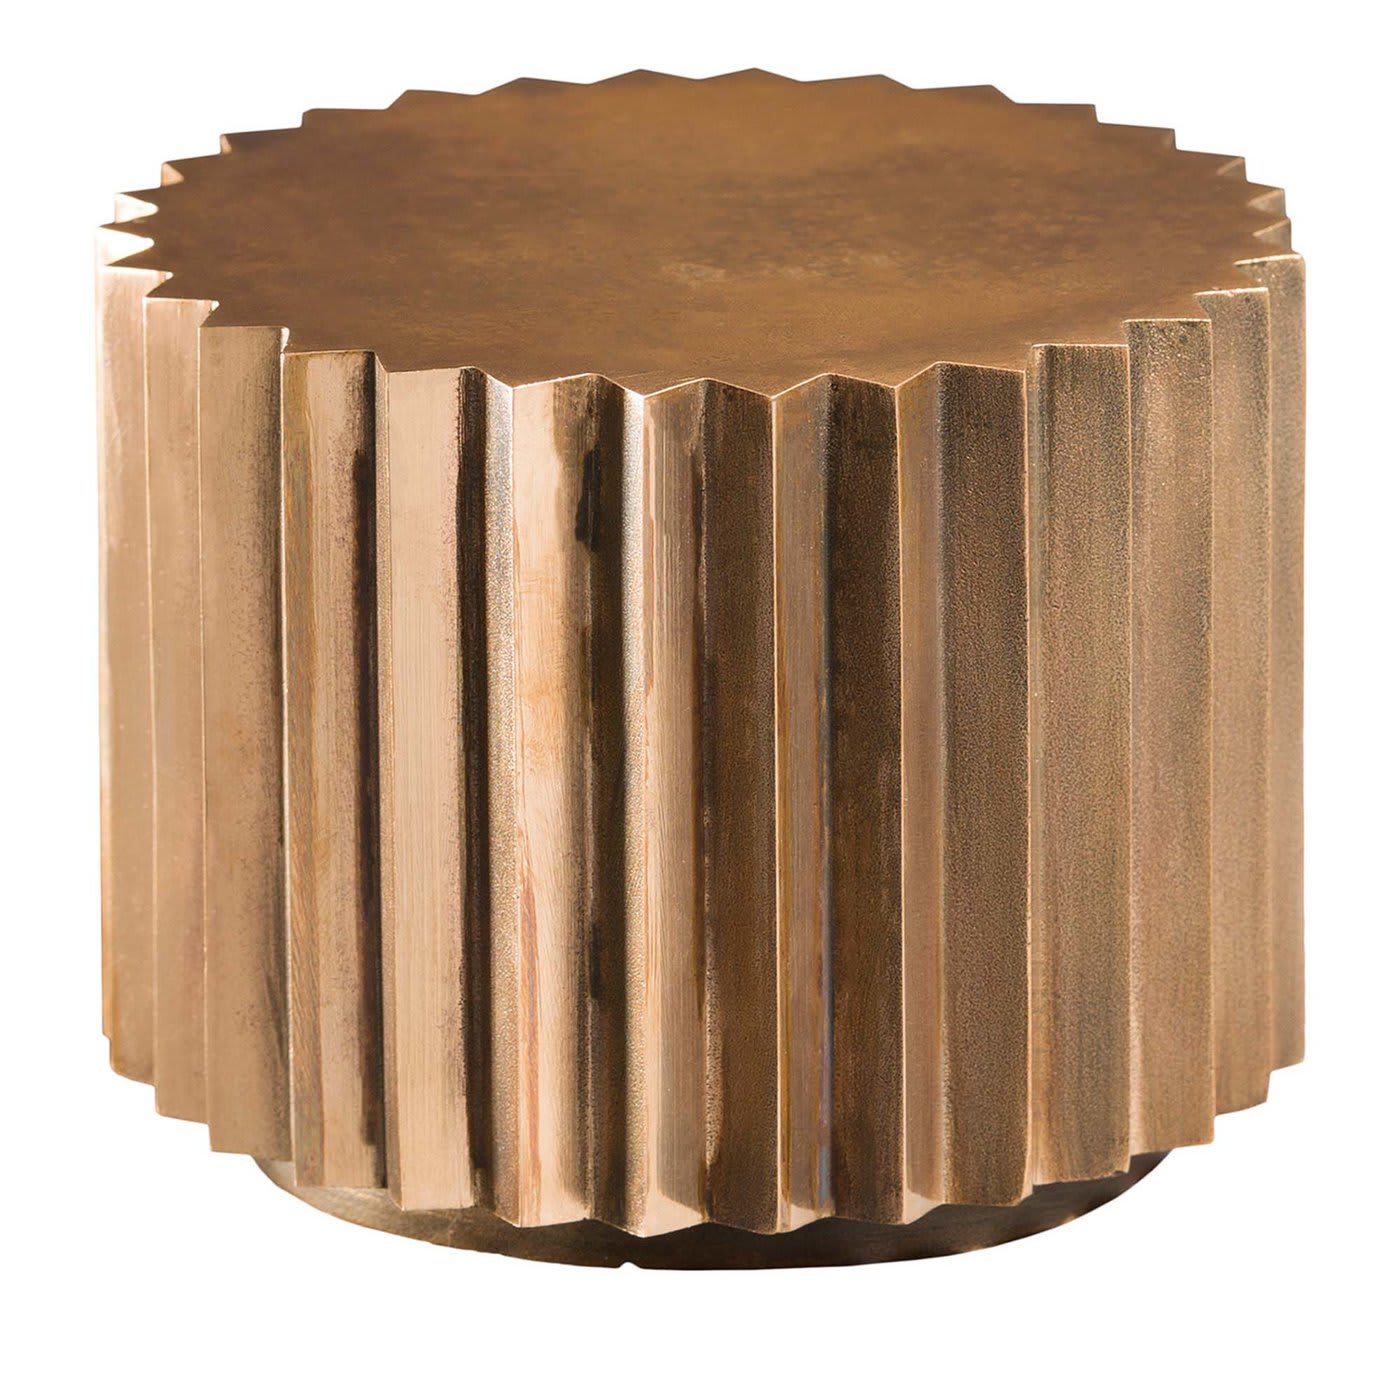 Doris Cast Oxidized Bronze Multifaceted Side Table - Fred&Juul